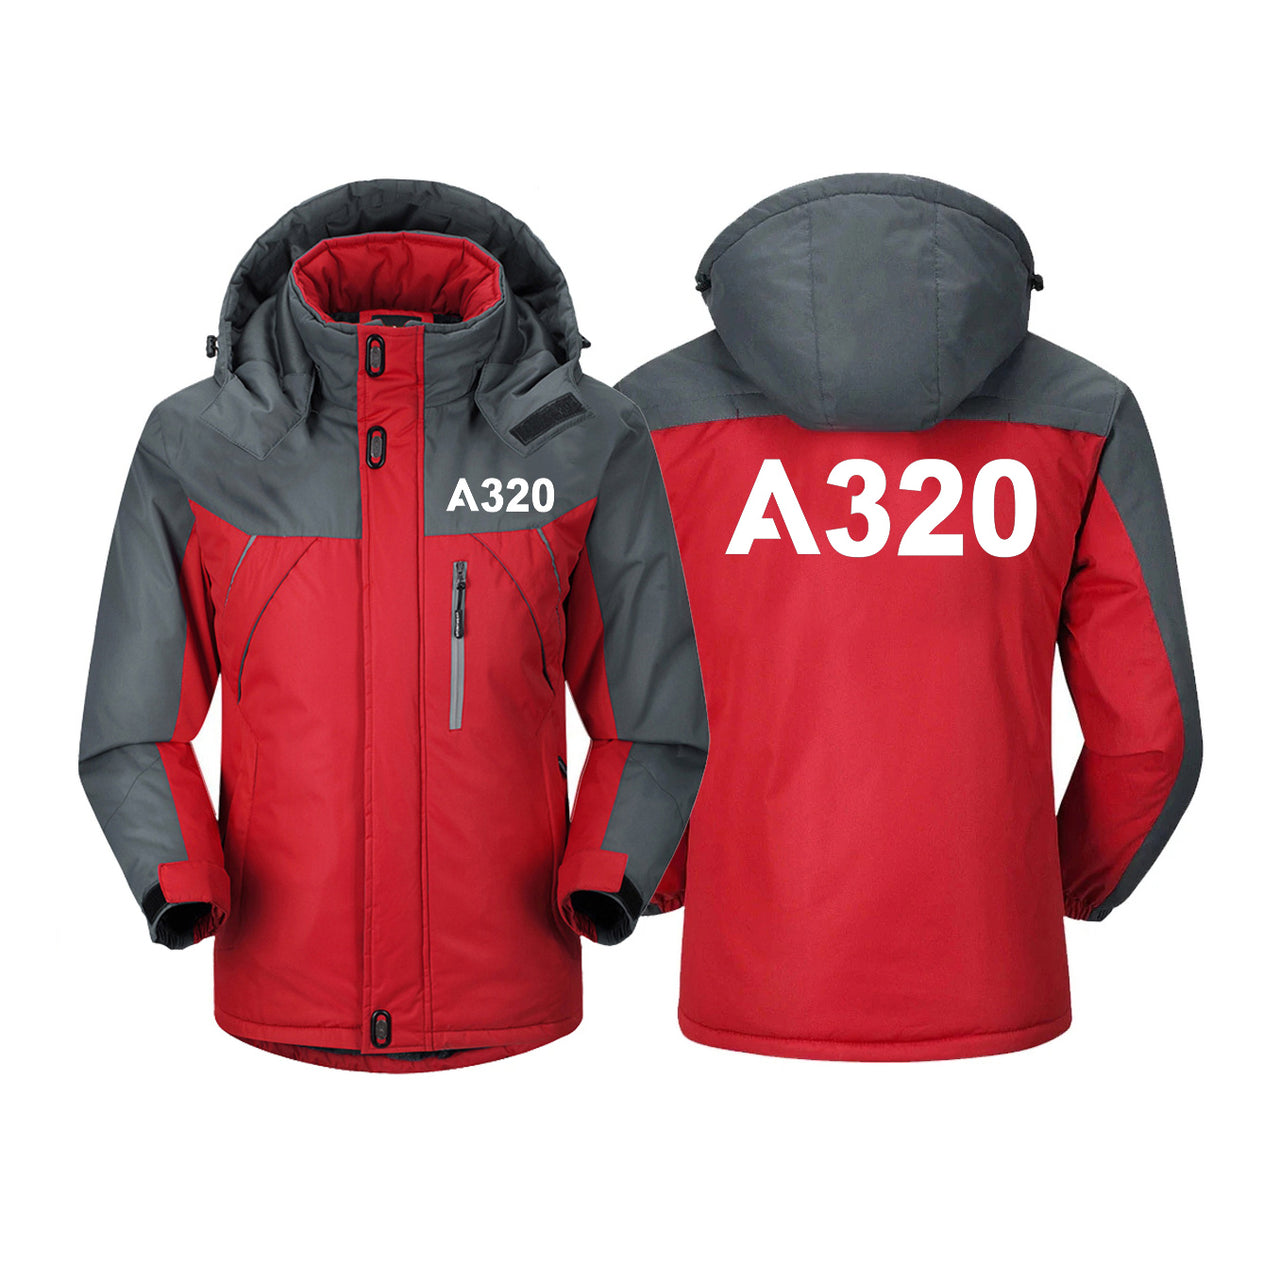 A320 Flat Text Designed Thick Winter Jackets